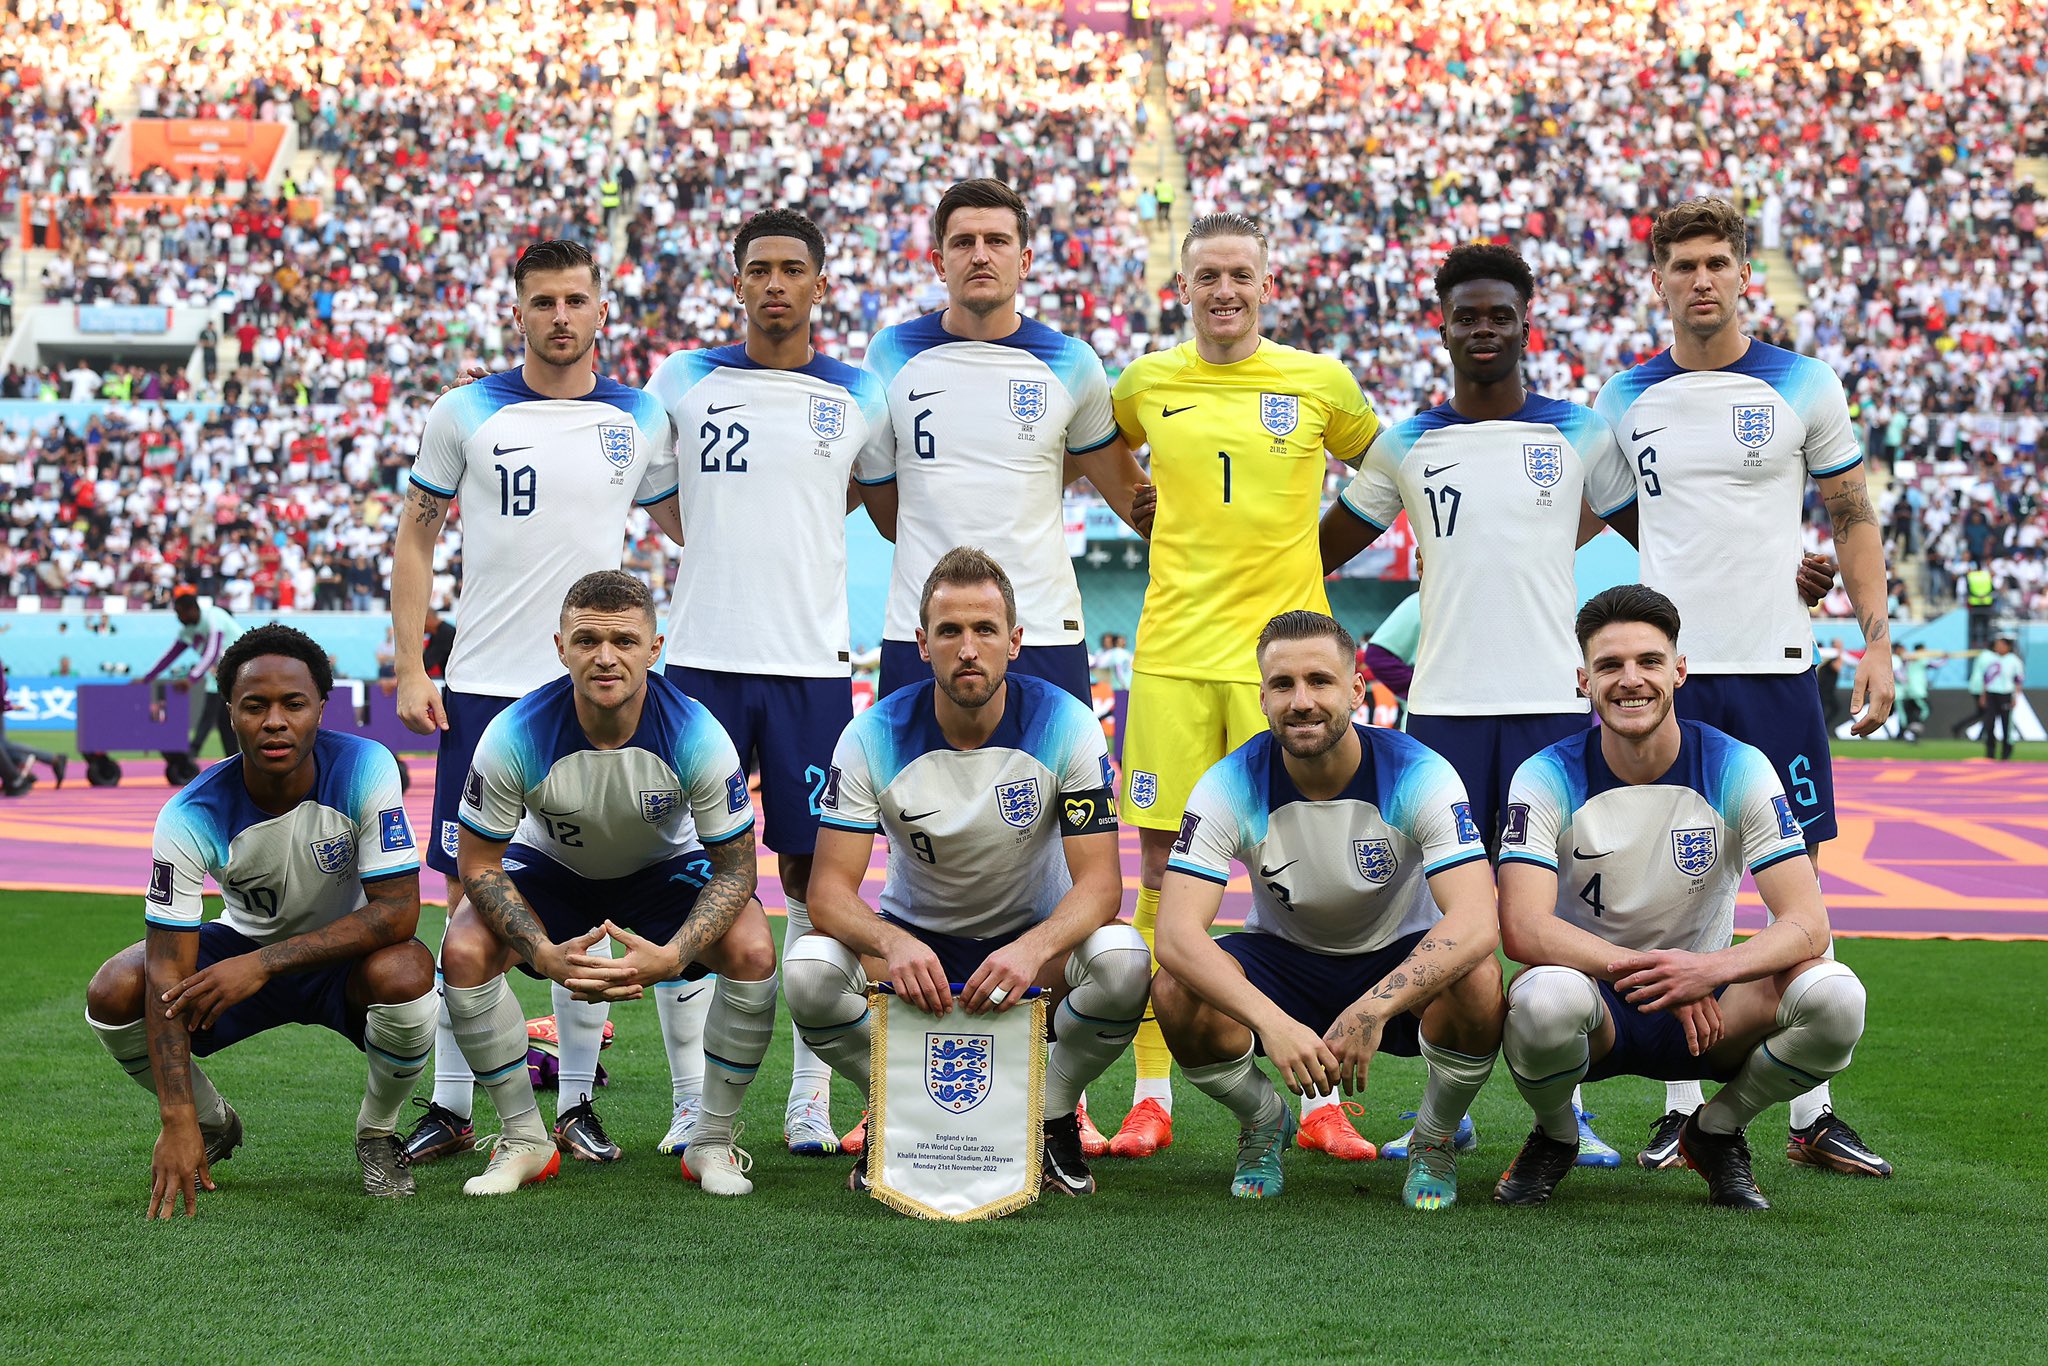 FIFA World Cup 2022 England vs Wales Group B: Head to head, stats, predicted lineups, formations